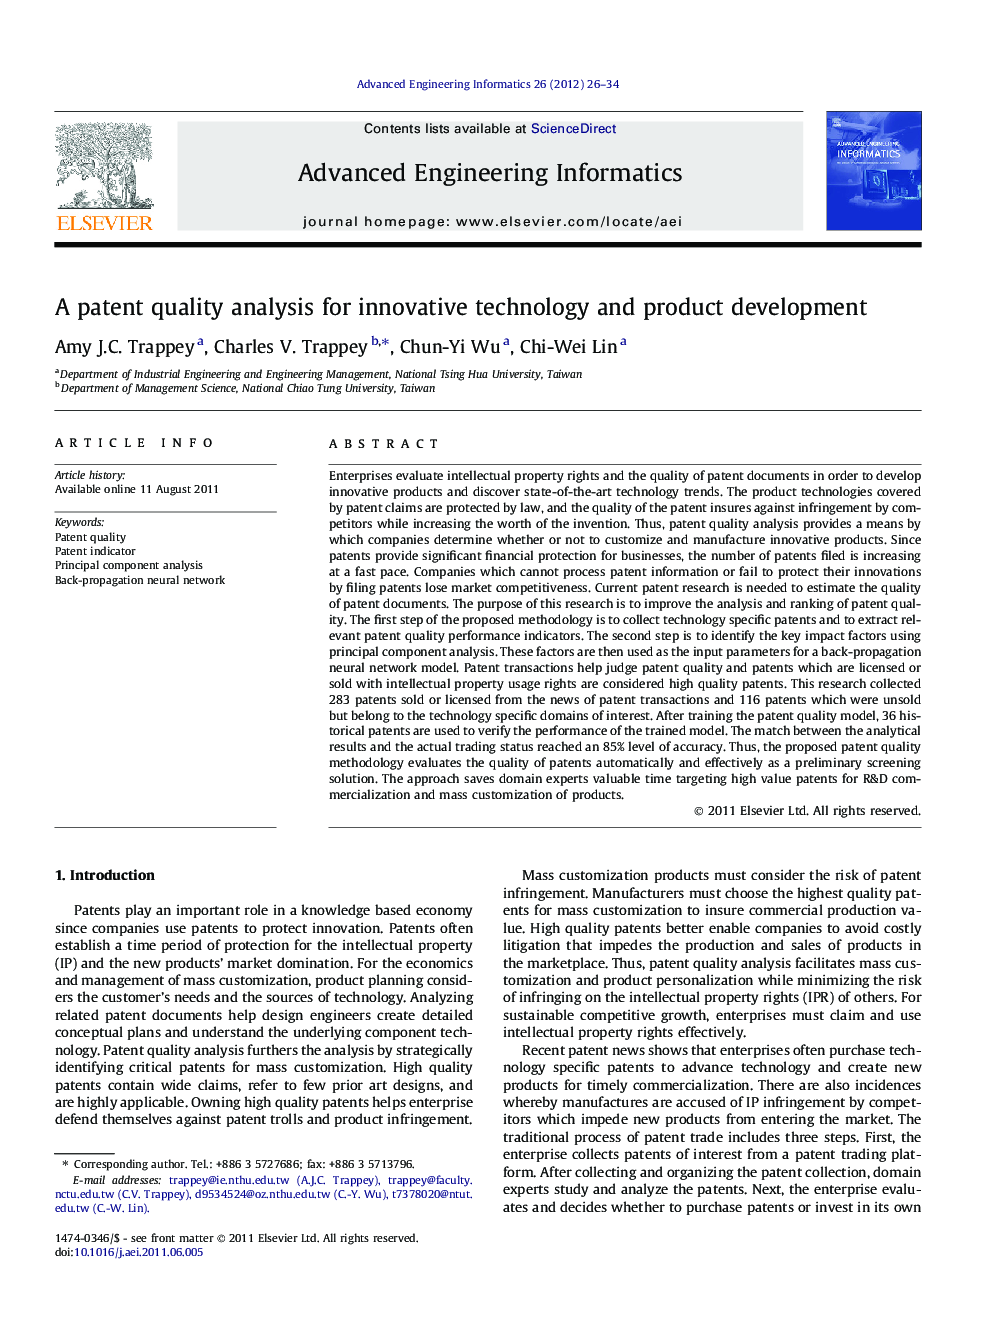 A patent quality analysis for innovative technology and product development